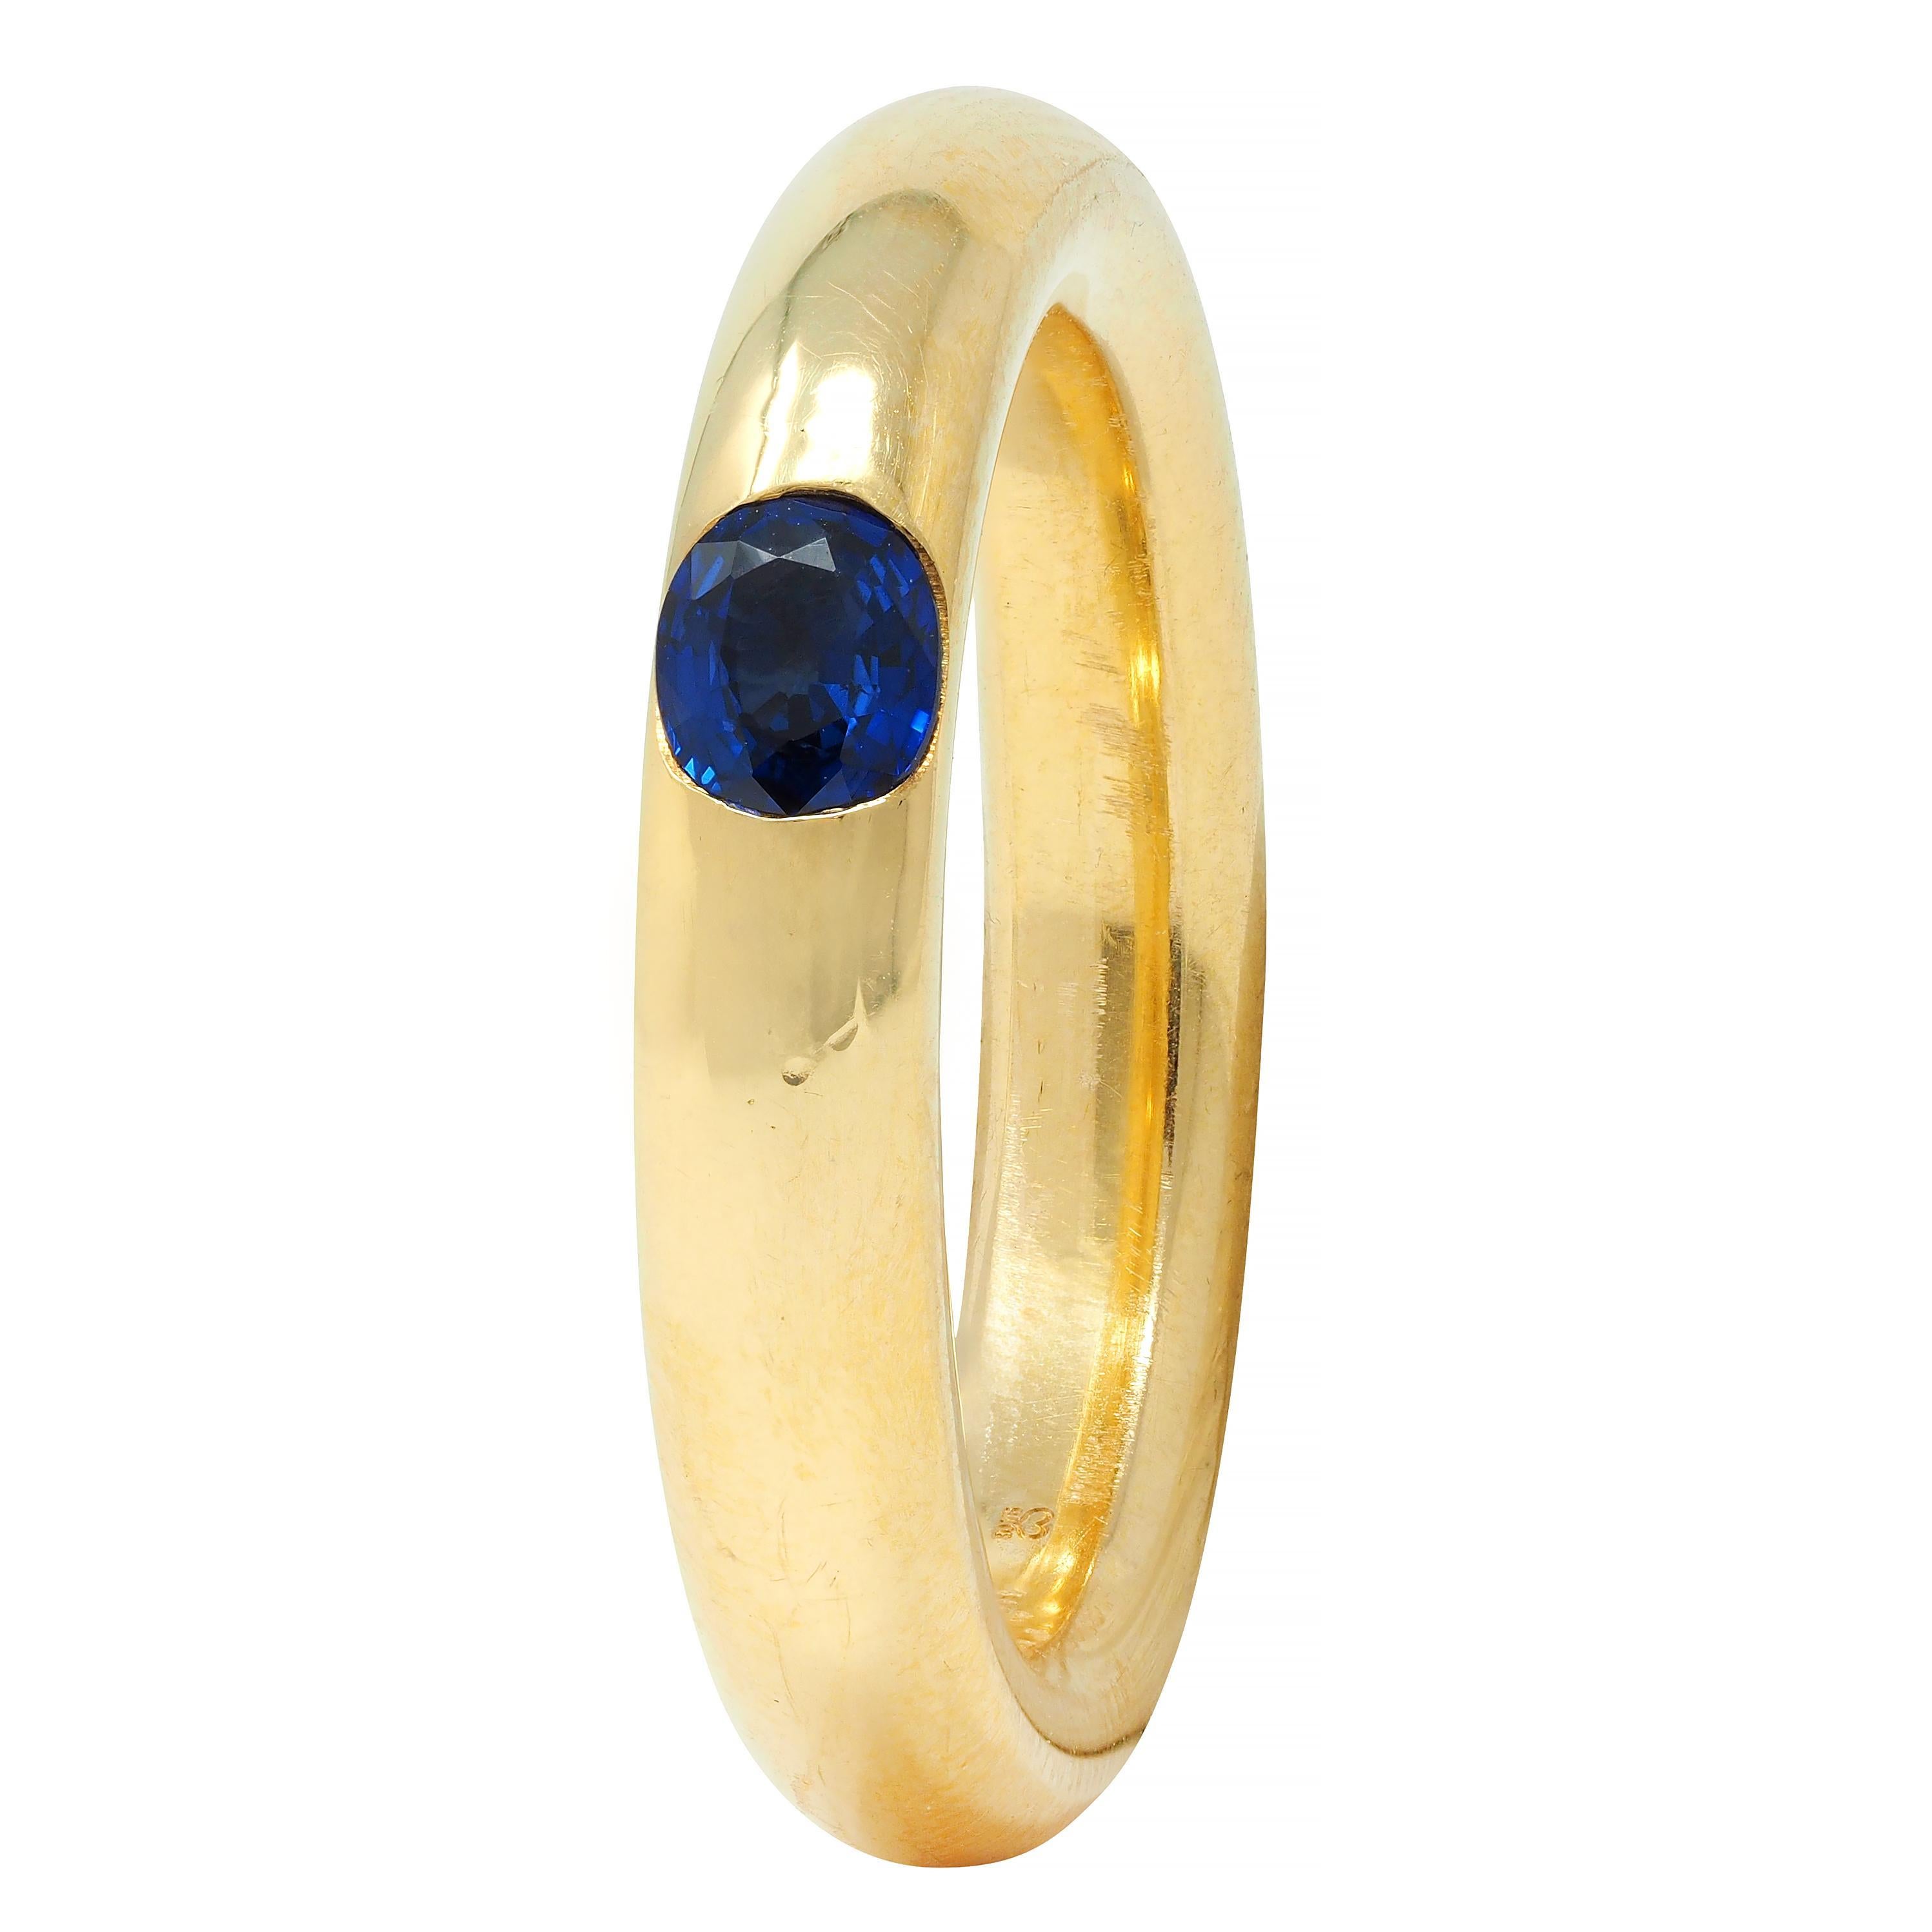 Centering a cushion cut sapphire weighing approximately 0.50 carat 
Transparent medium blue in color and flush set east to west
With a rounded gold donut-style shank
Complete by high polish finish
Inscribed 'SA OE' under a heart
Stamped for 18 karat